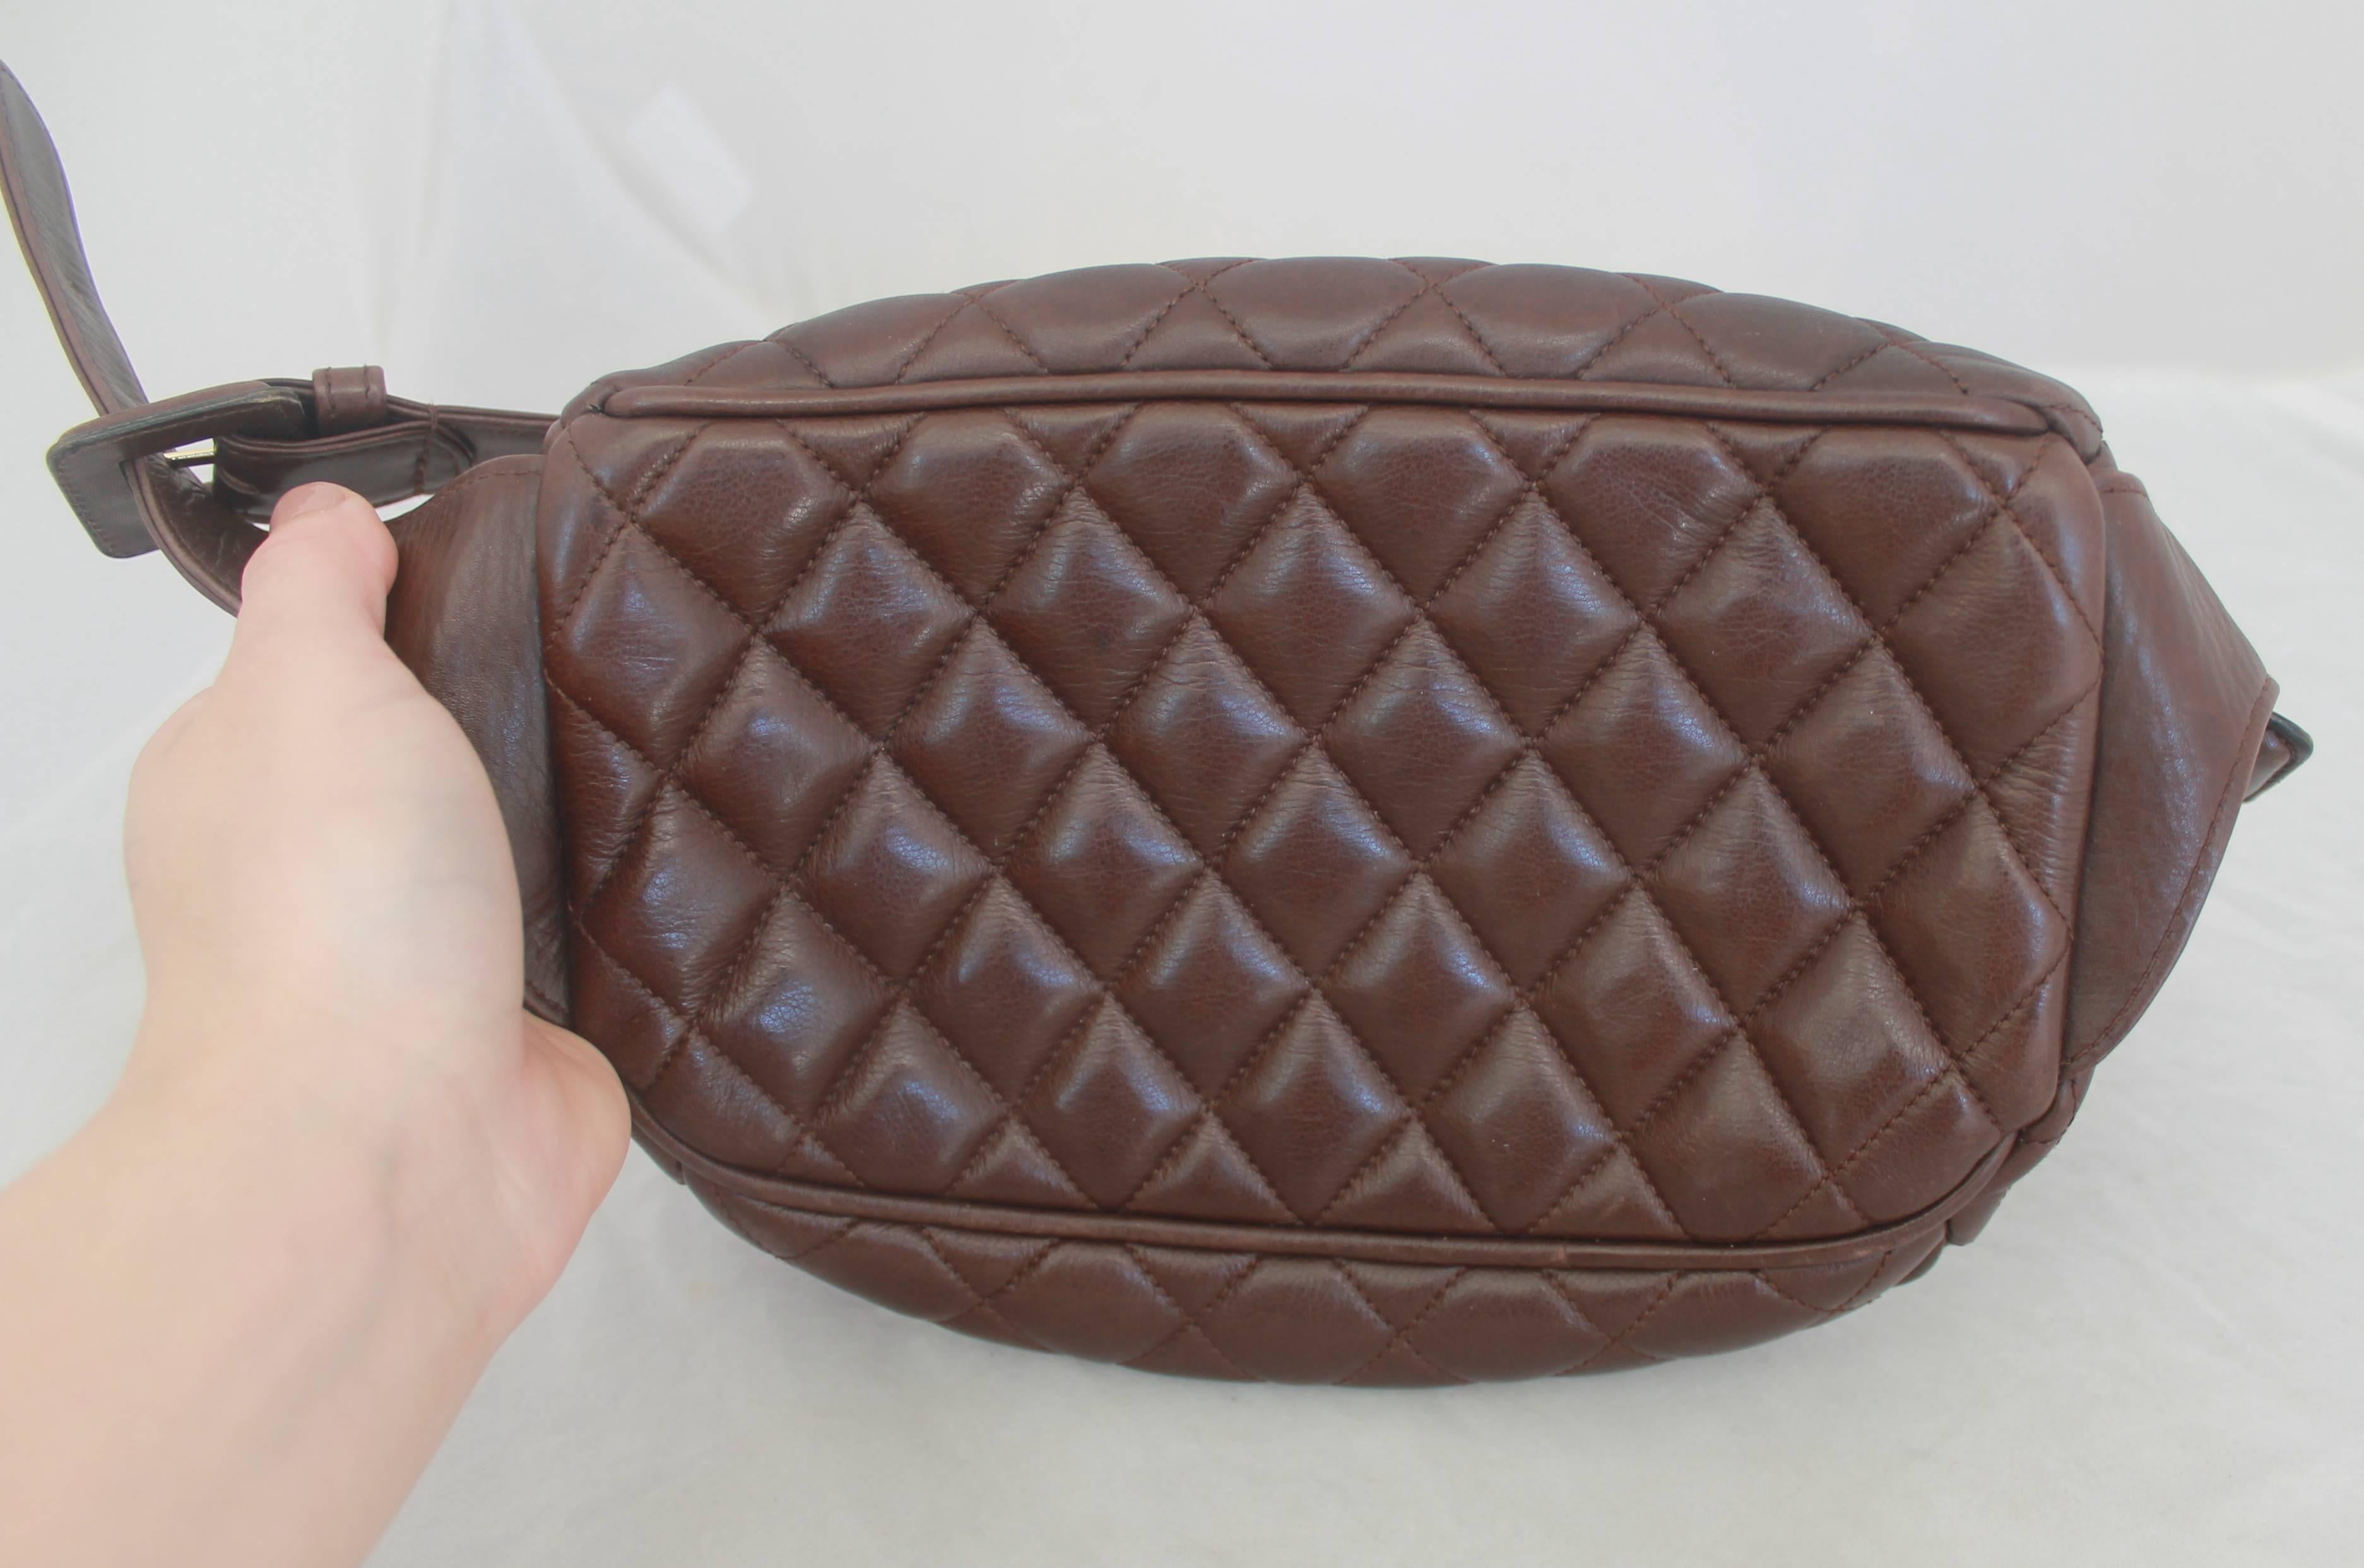 Chanel Vintage Brown Quilted Lambskin Fanny Pack - GHW - Early 1980's. This vintage fanny pack has a belt buckle adjustment on both sides, gold hardware, a hanging 